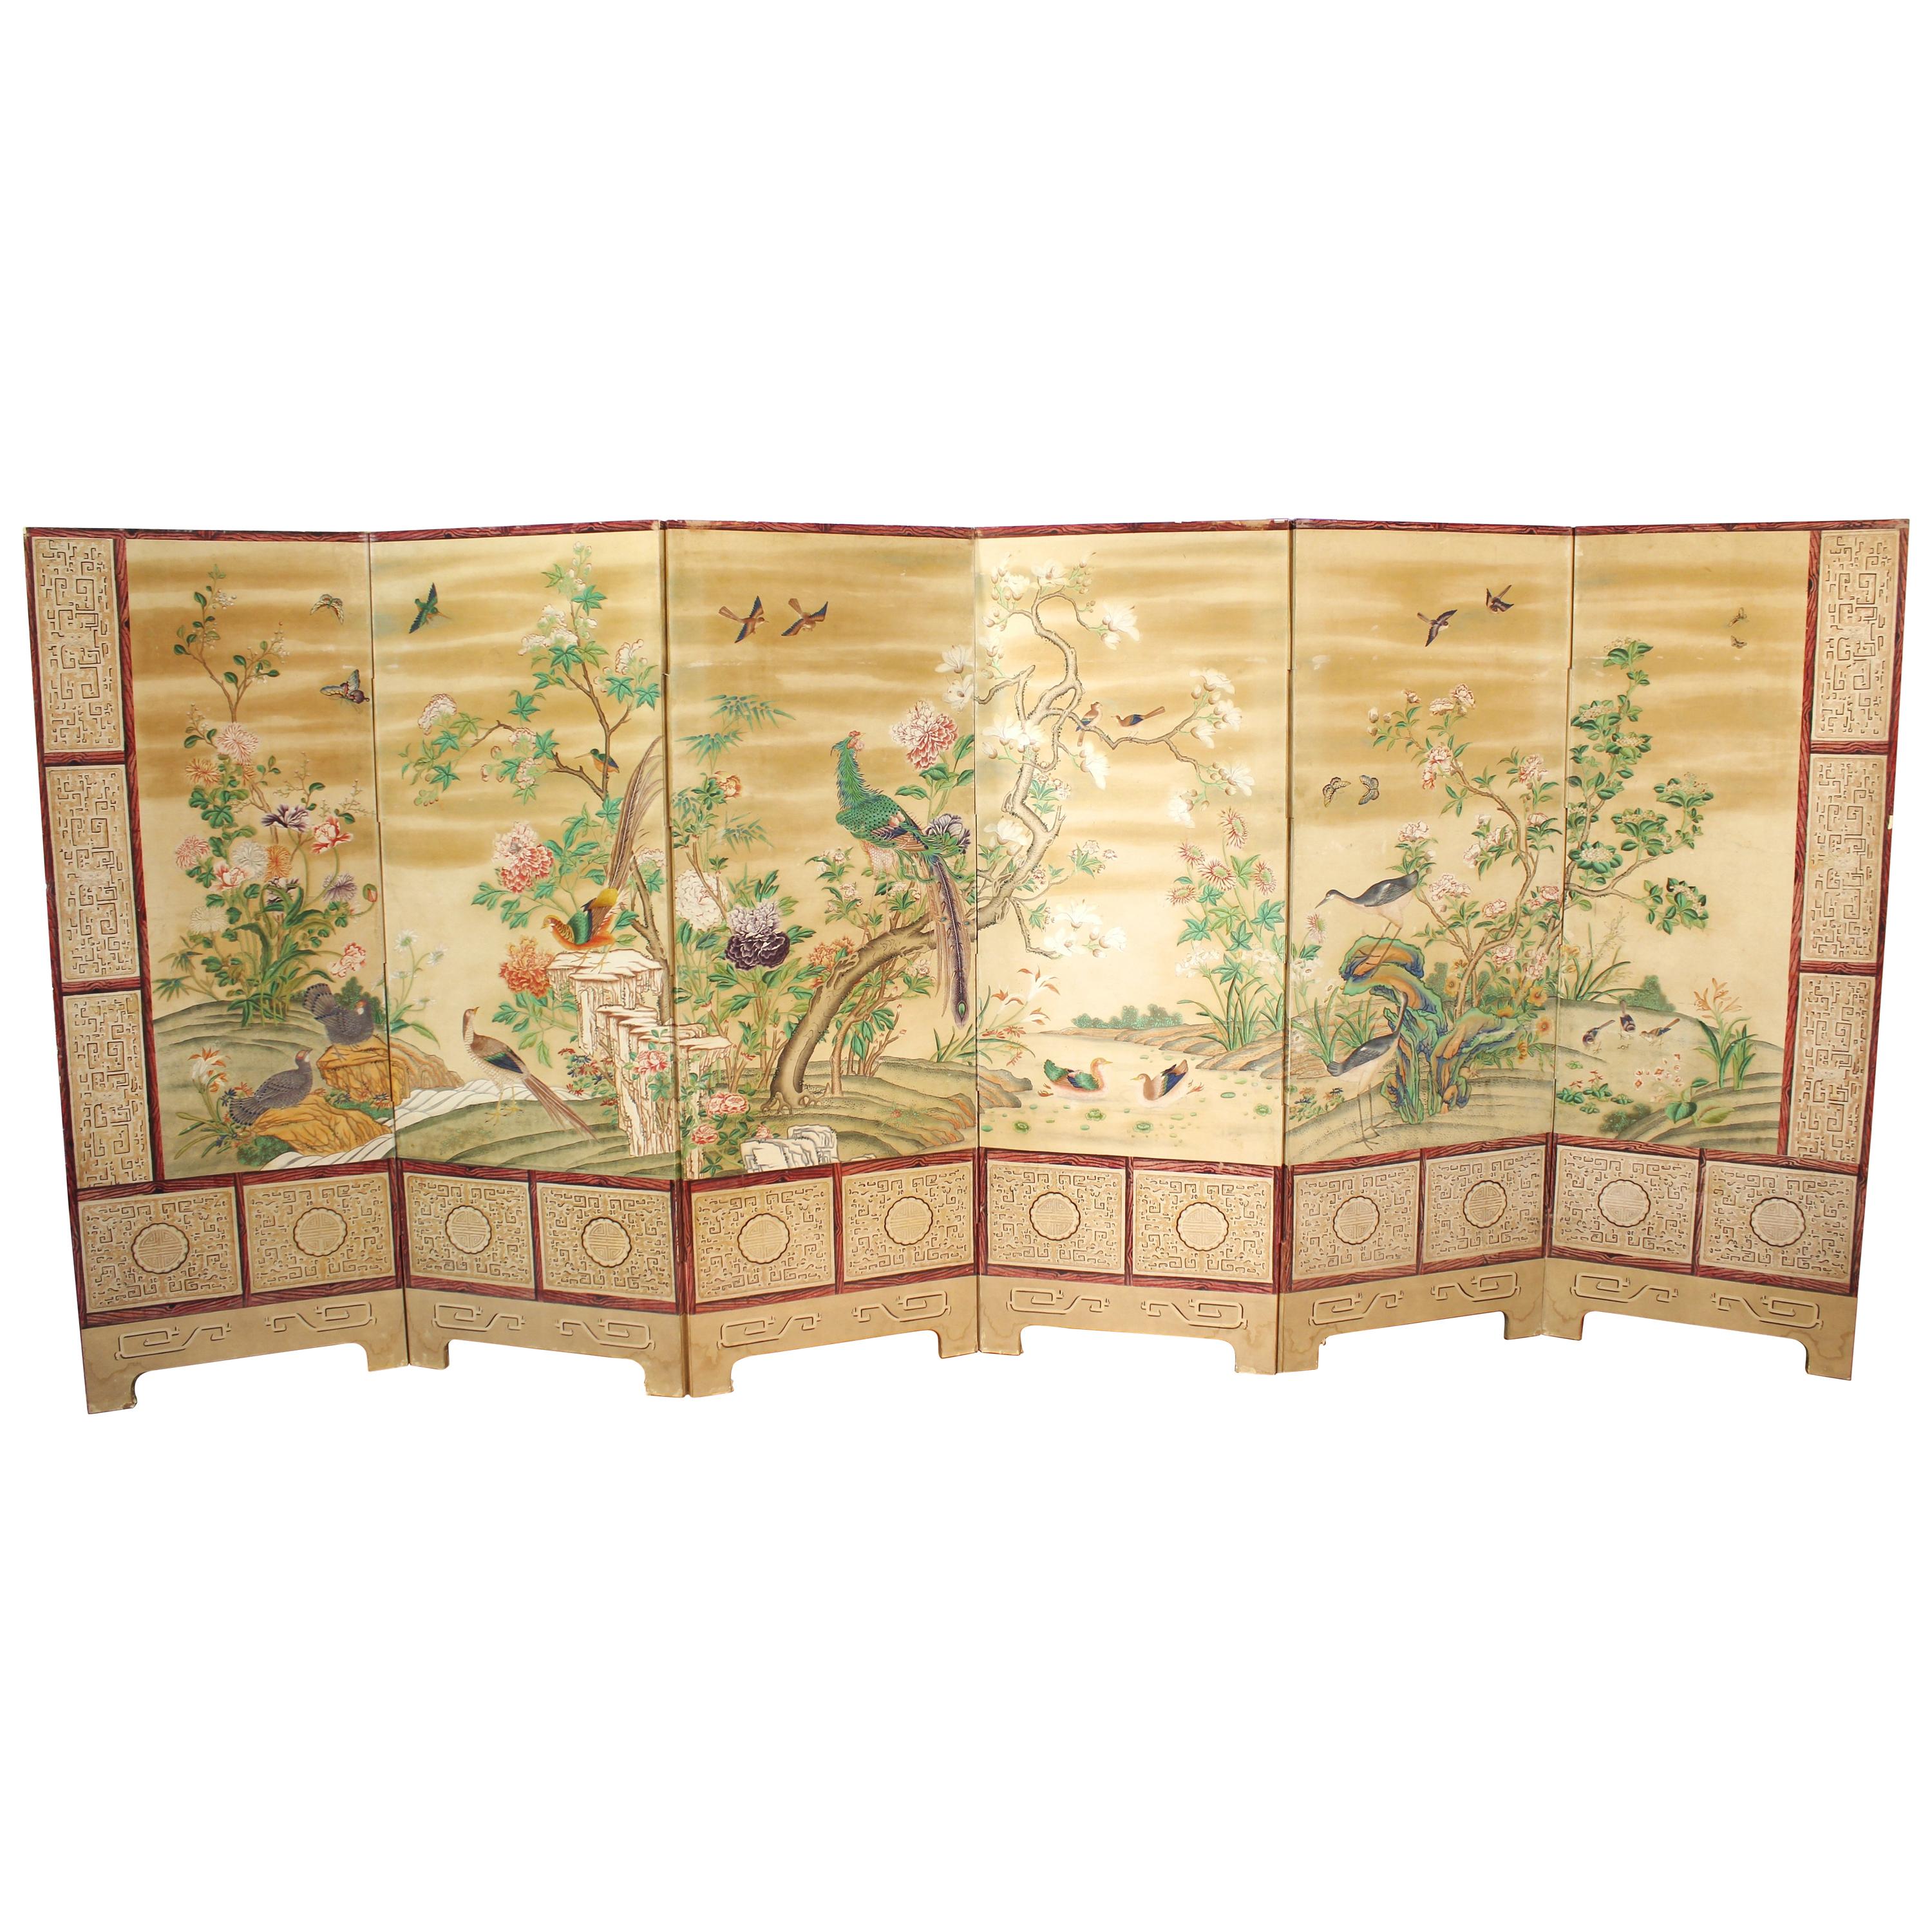 Chinese Export Hand-Painted Wallpaper Six Panel Screen with Birds and Flowers